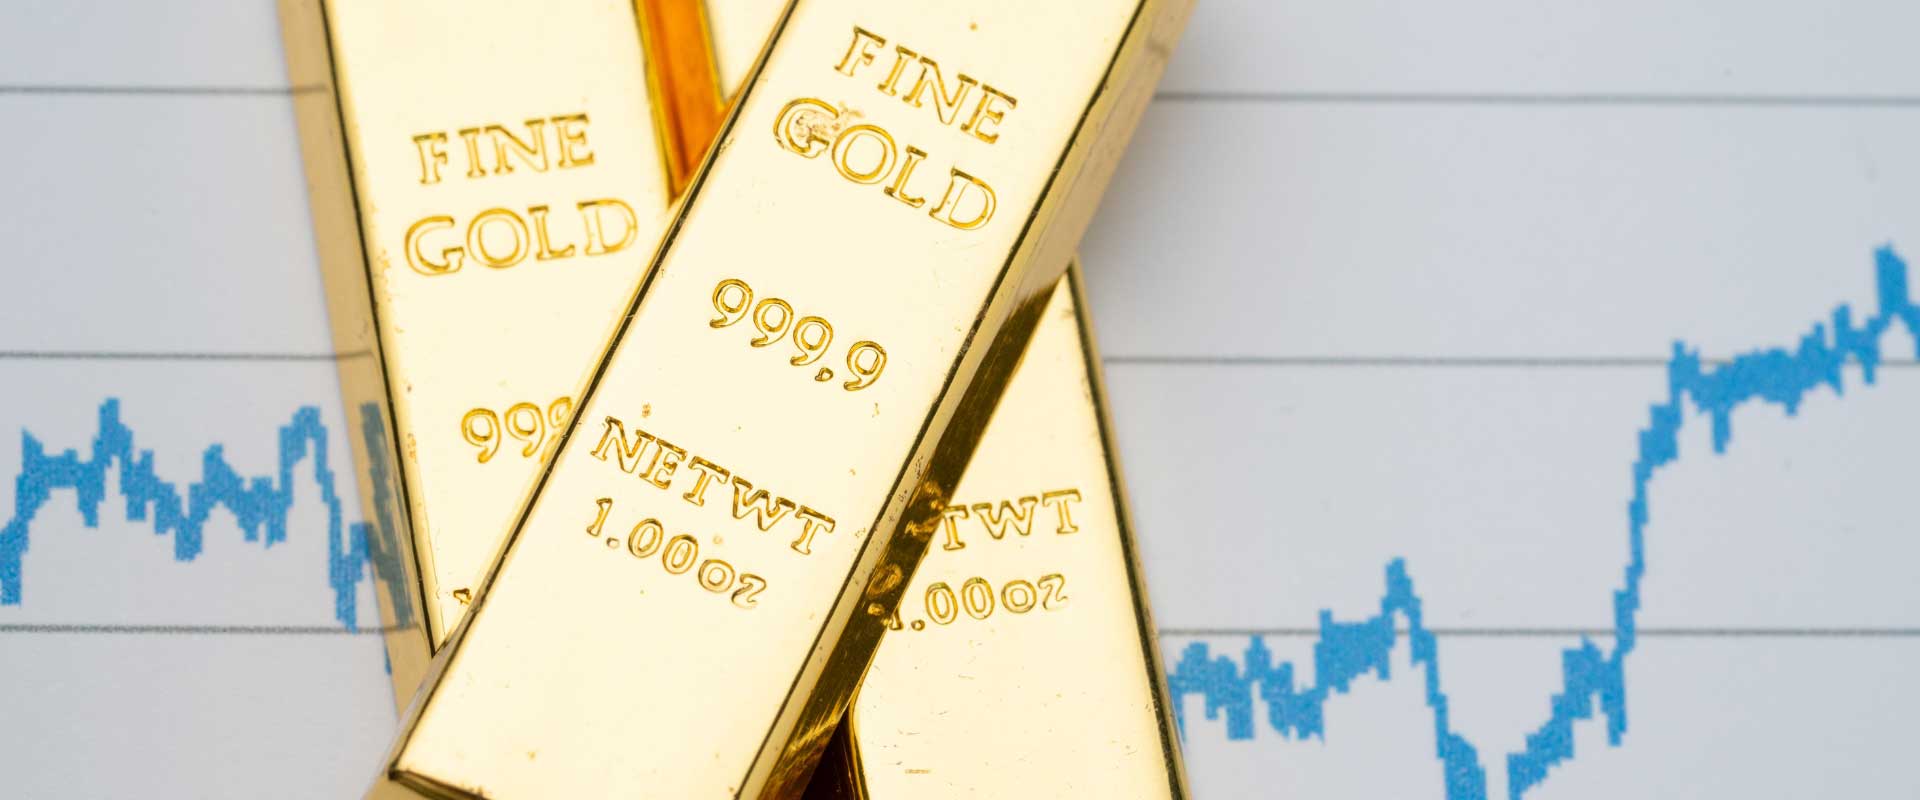 one ounce gold bars on gold price chart